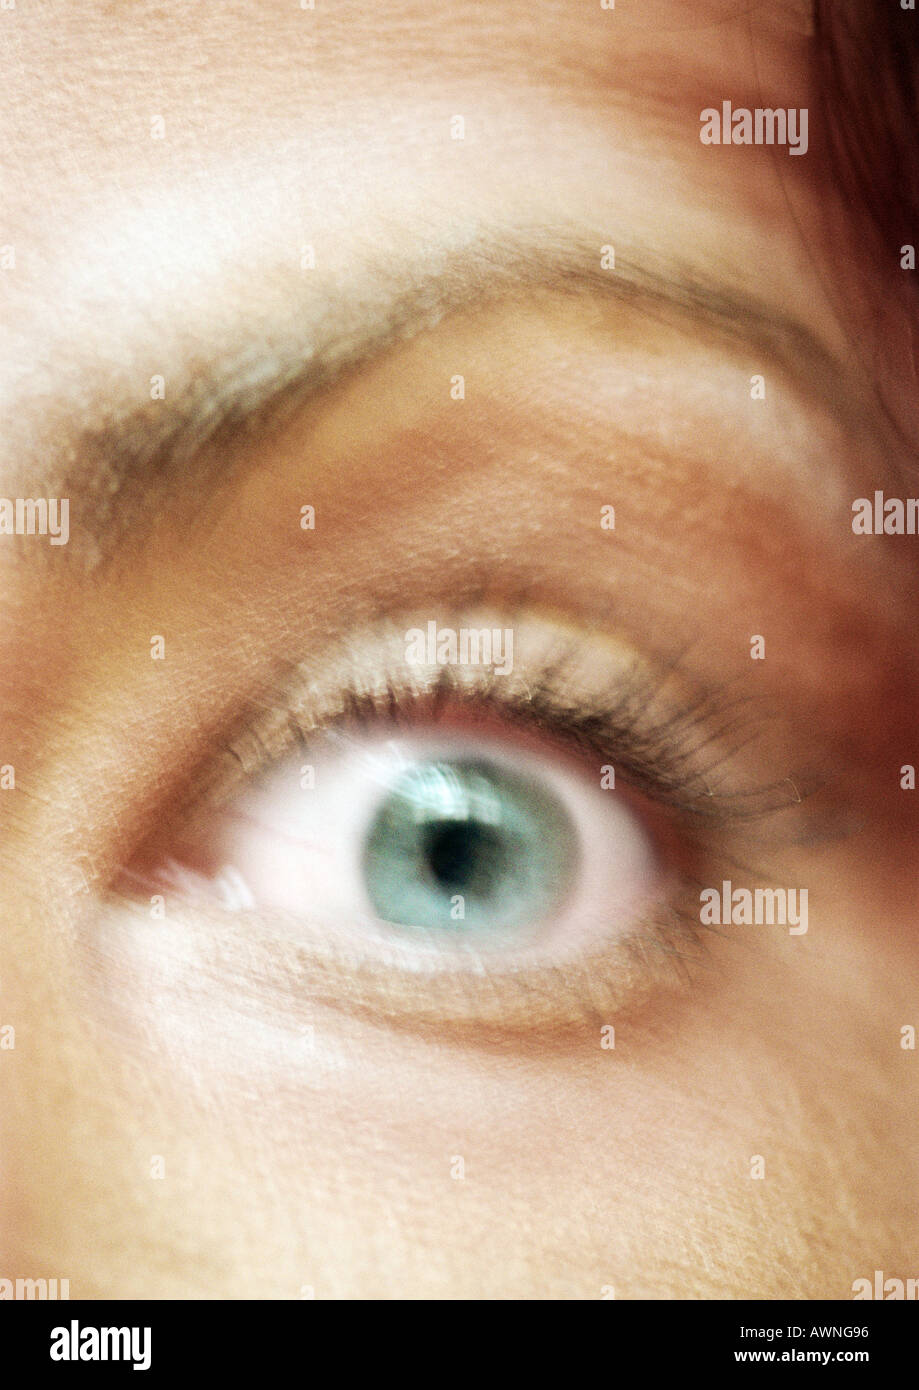 Woman's green eye and raised eyebrow, close-up, blurred. Stock Photo